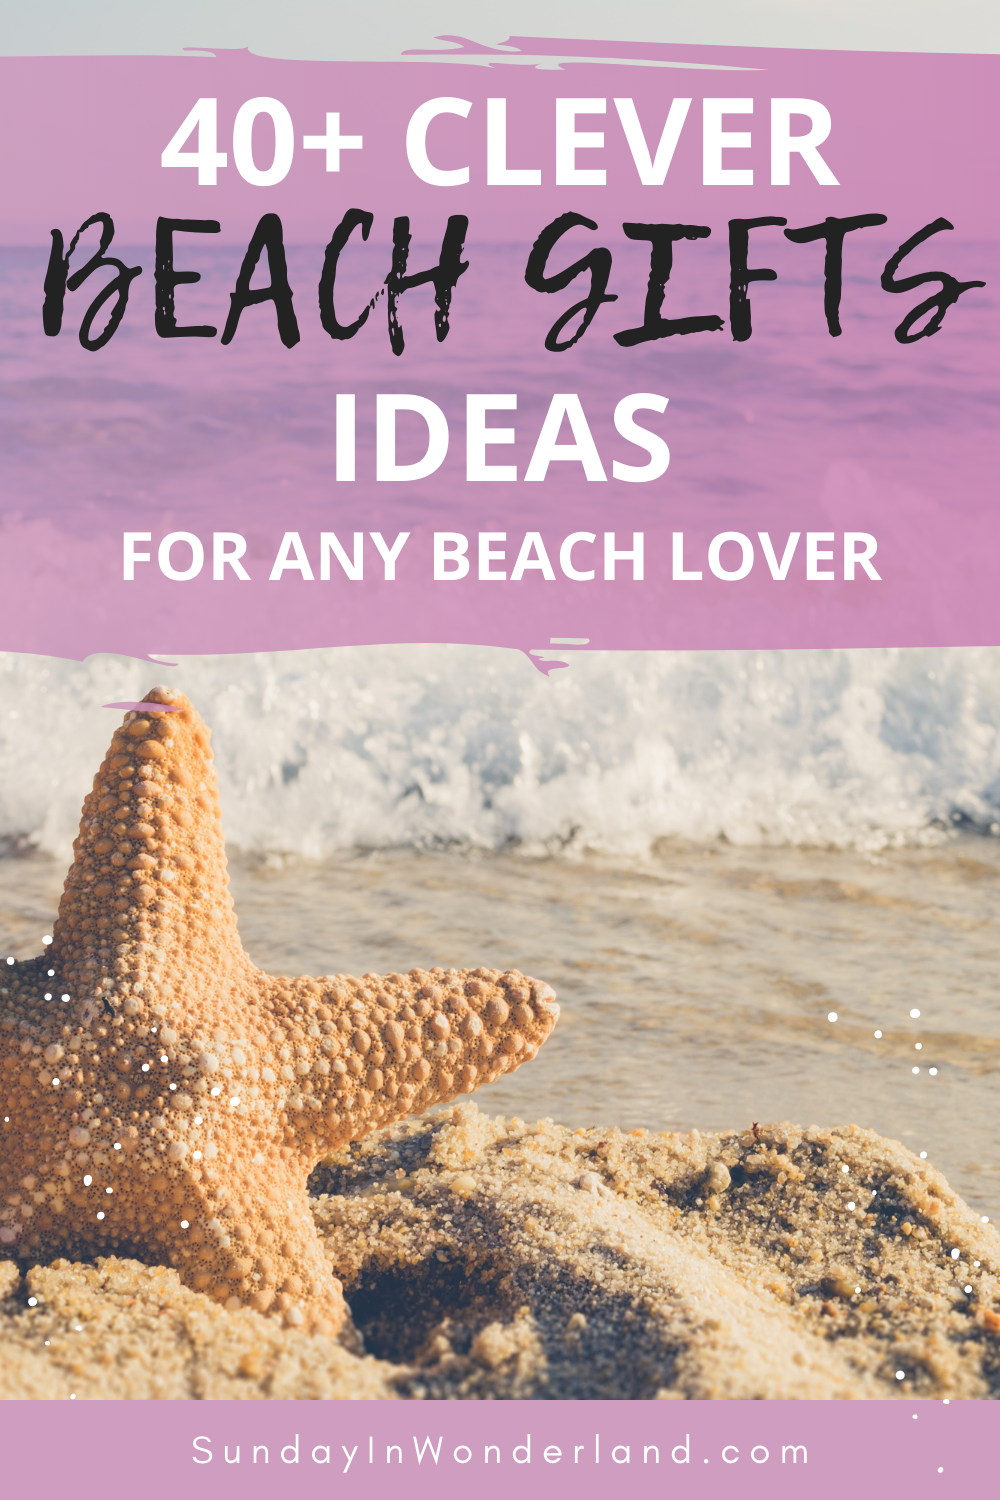 40+ beach gifts for beach lovers